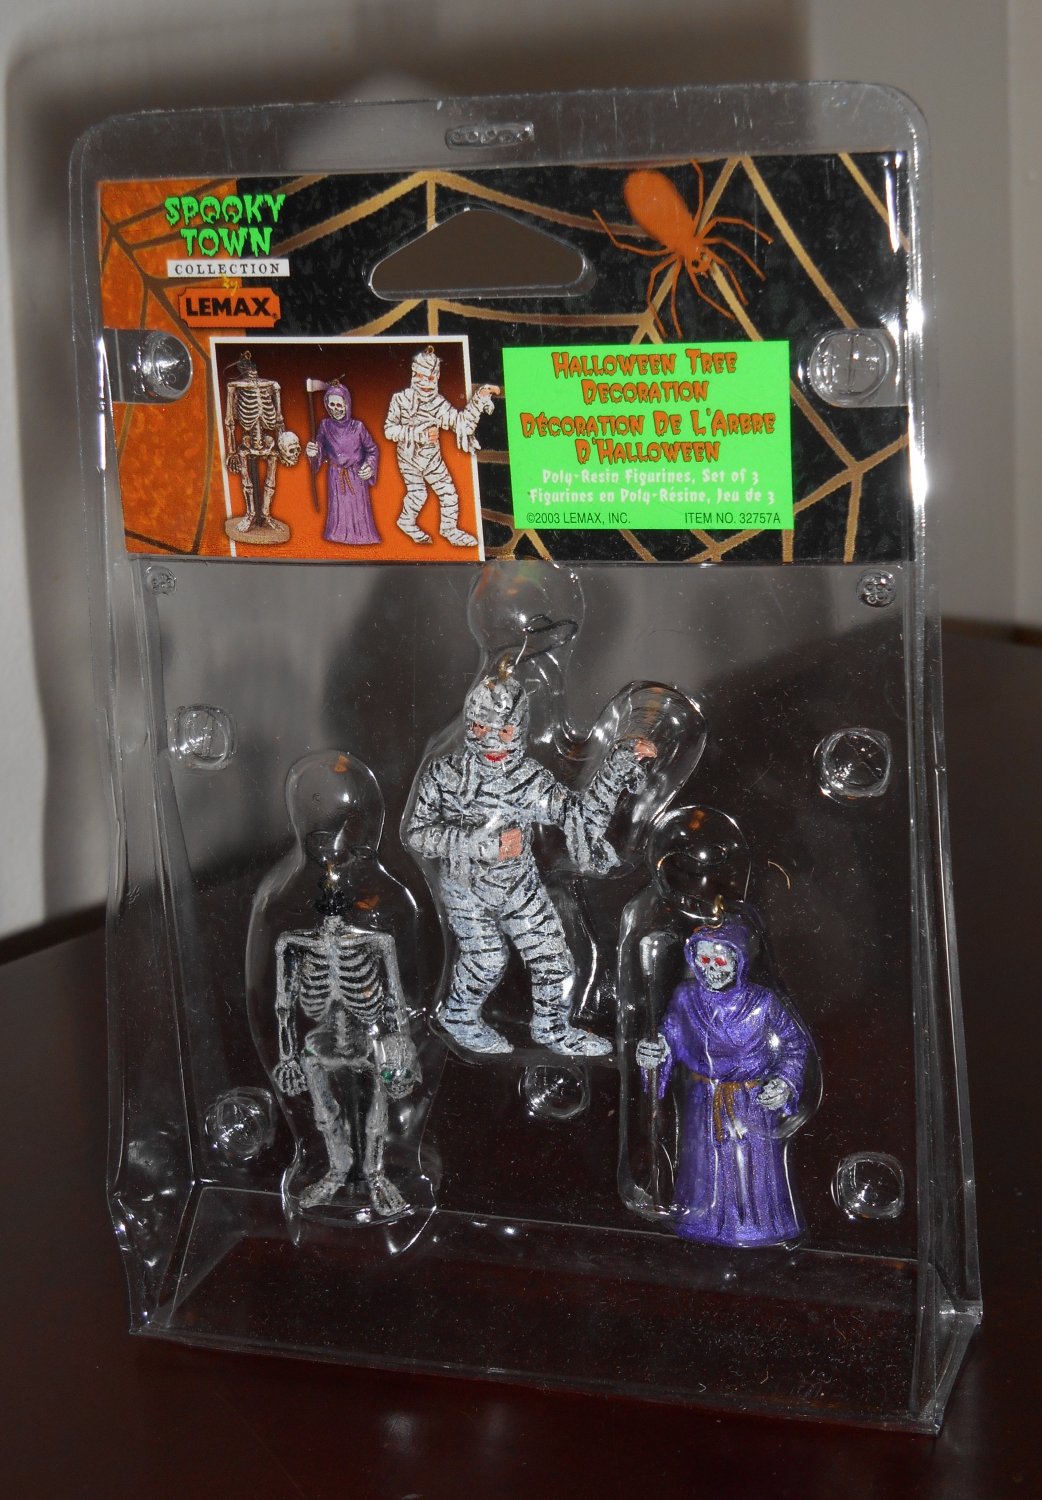 Halloween Tree Decoration Set of 3 Lemax 32757 Mummy Grim Reaper Skeleton Spooky Town Collection